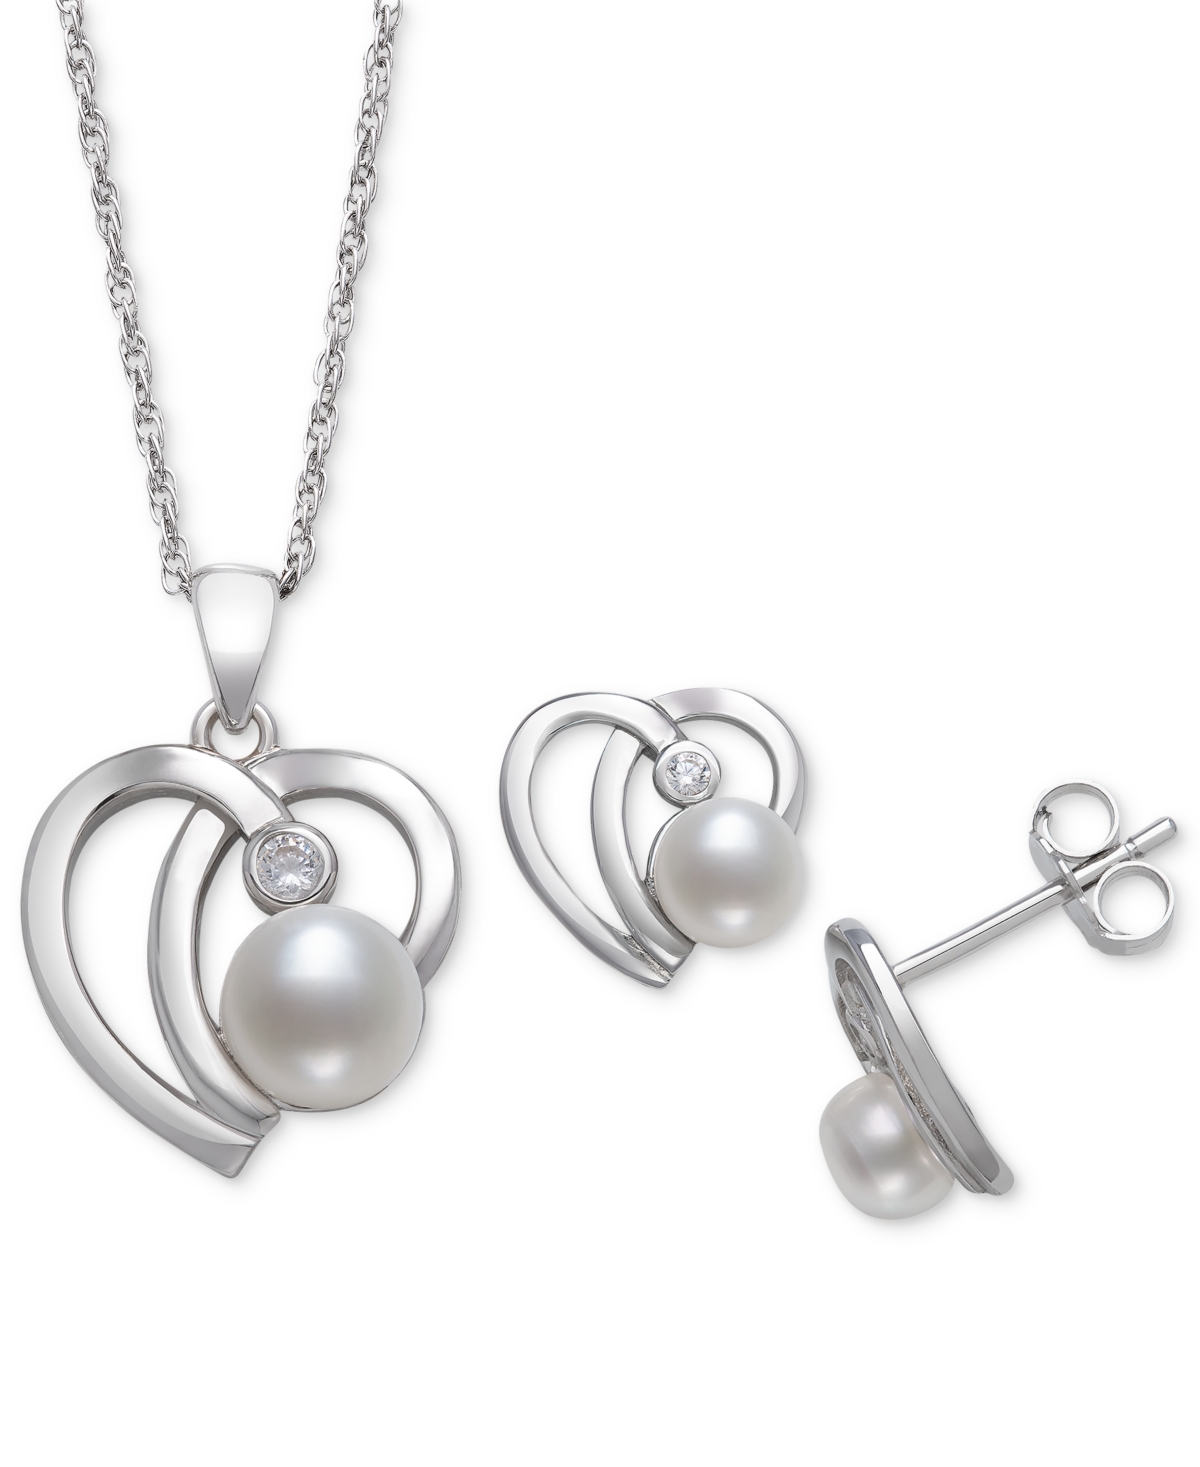 2-Pc. Set Cultured Freshwater Button Pearl (6mm) & Cubic Zirconia Heart Pendant Necklace & Matching Stud Earrings in Sterling Silver - St